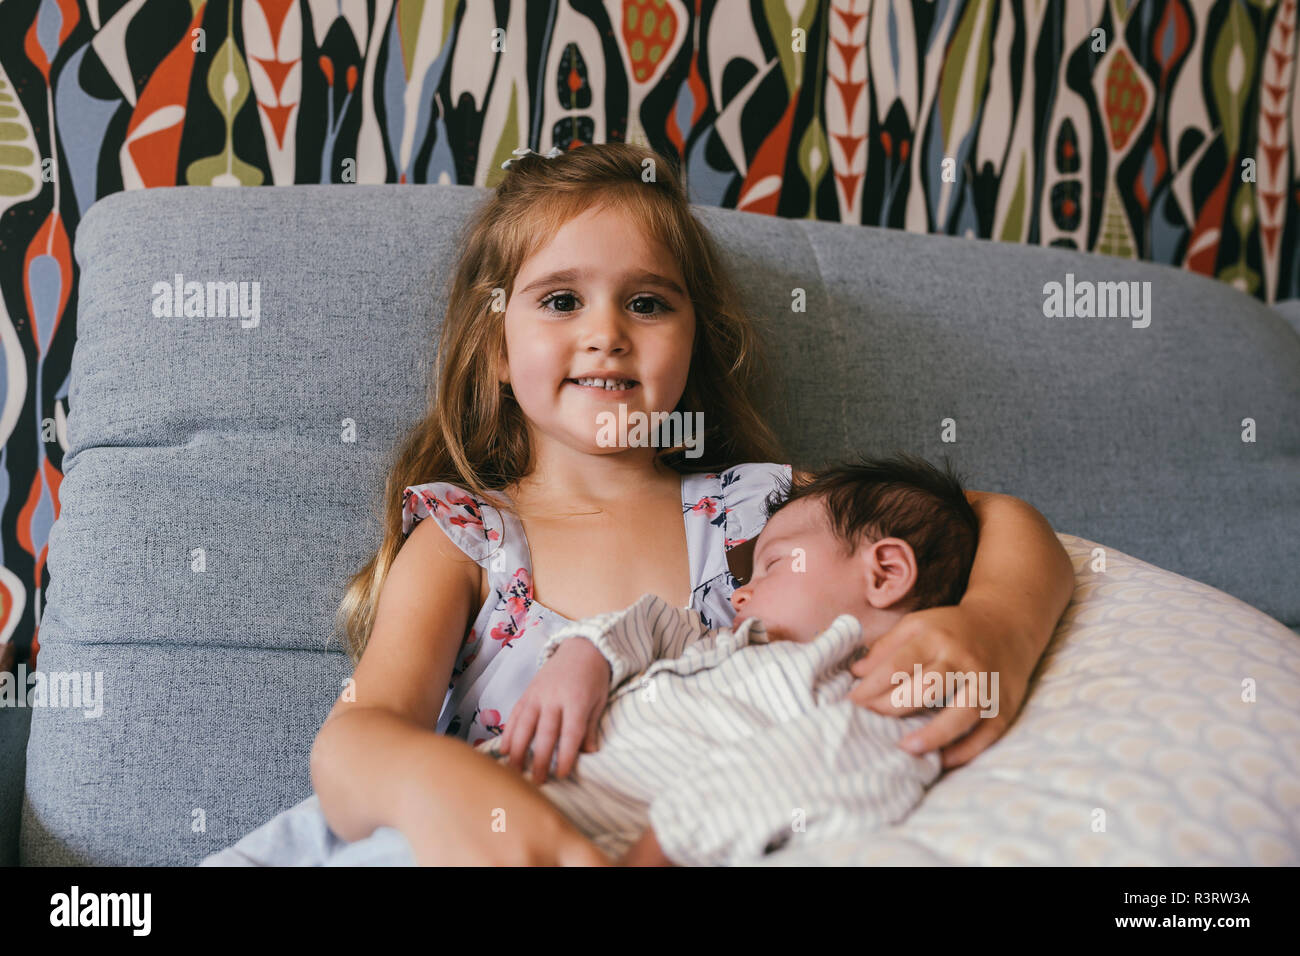 Smiling girl sitting on sofa holding newborn baby brother Banque D'Images